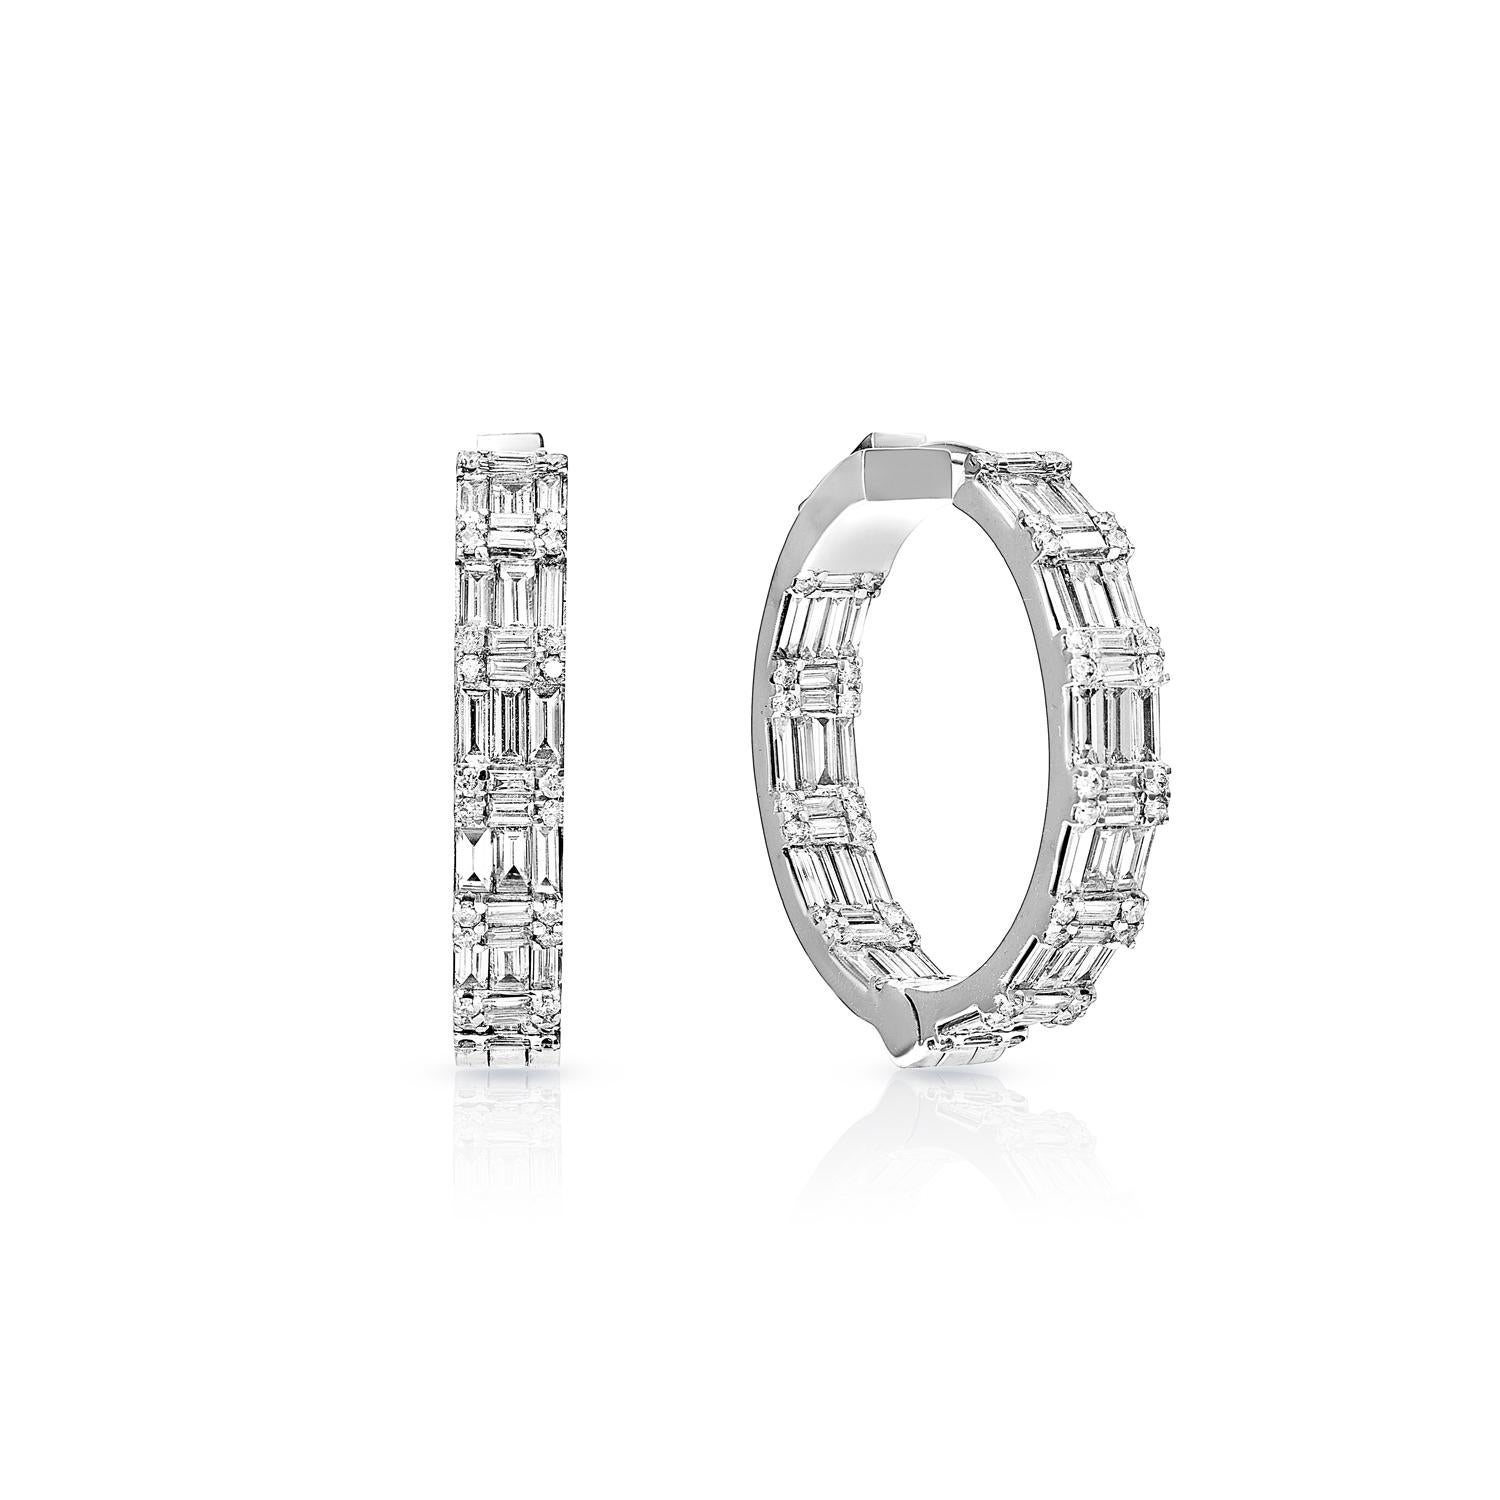 The perfect gift for her, these 5.41 carat Diamond Huggie Earrings For Ladies will take her breath away. These earrings feature a vibrant, sparkling hoop diamond that is set in 18kt White Gold. Gently curved arms make these earrings a